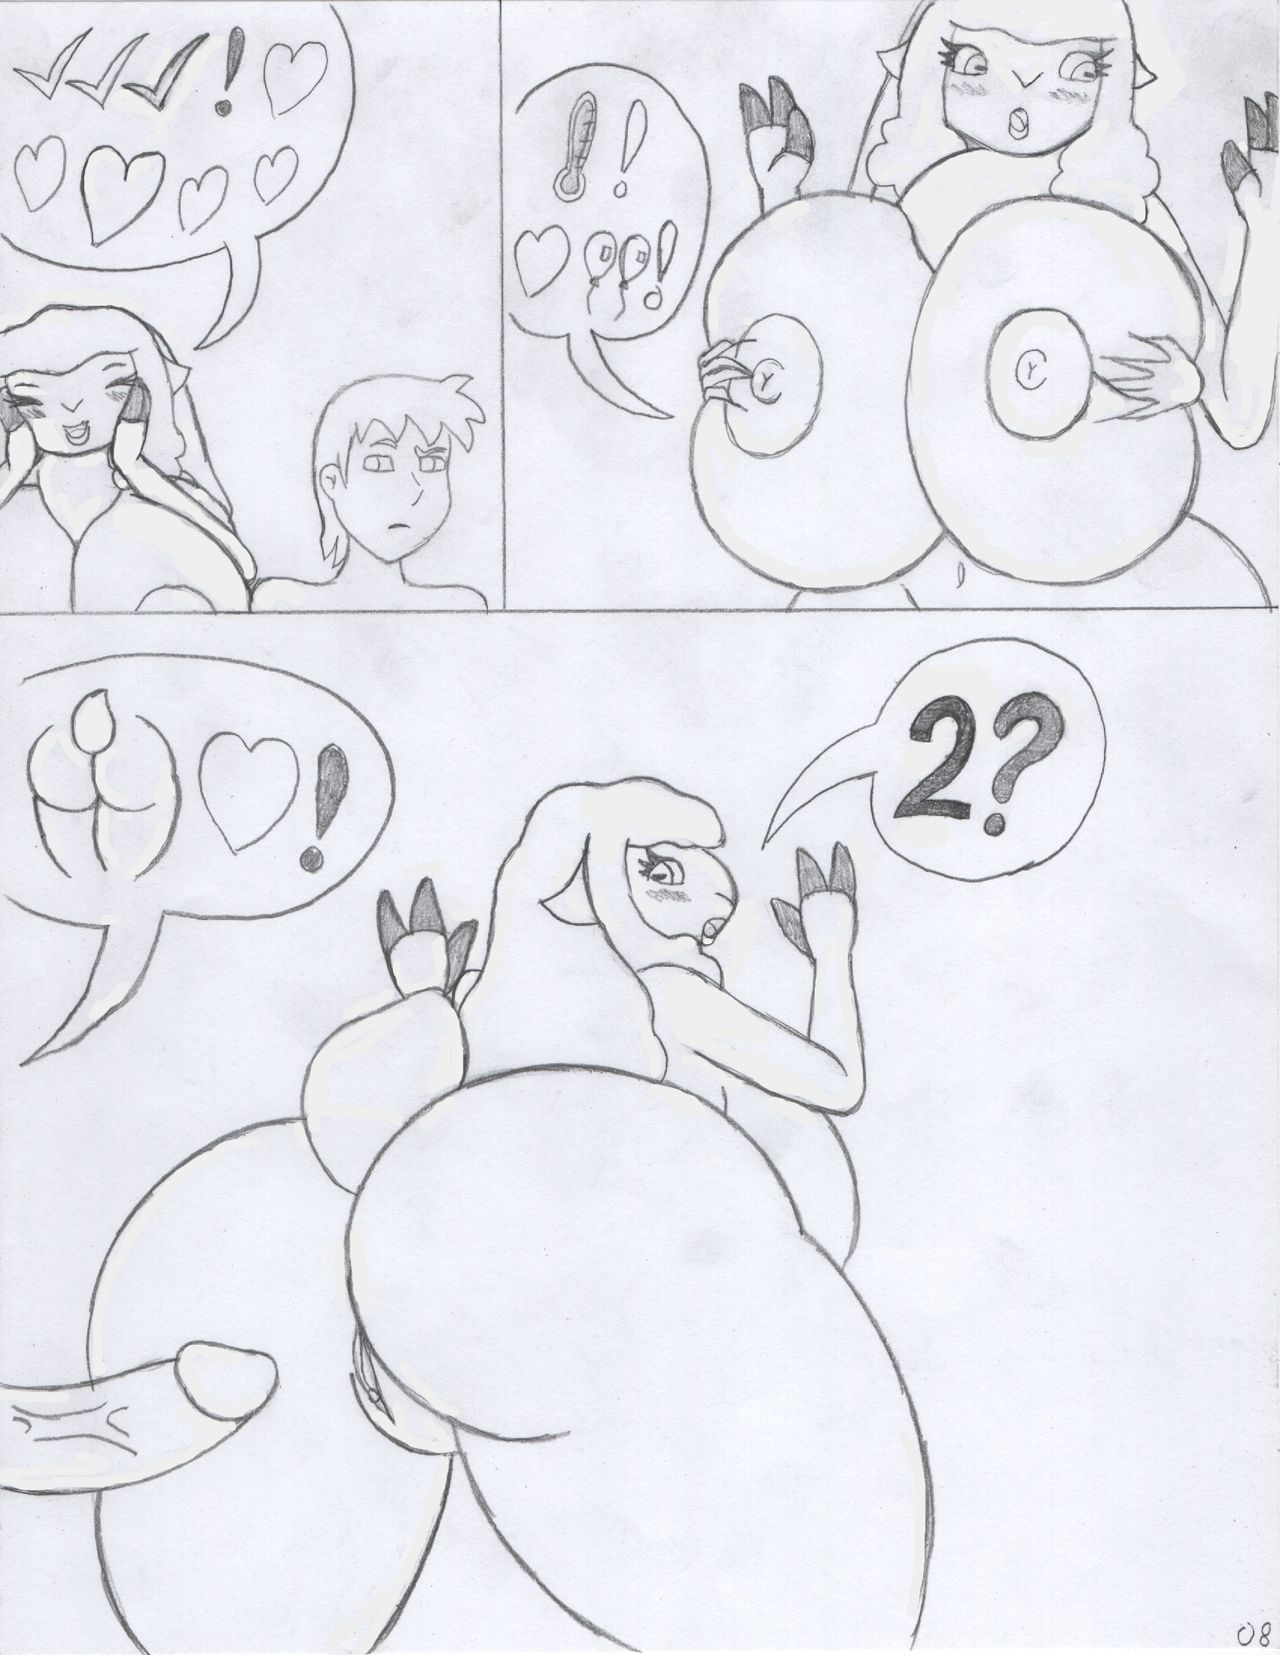 Foxtide888 Sketch Comics Gallery 2 (Ongoing) 58